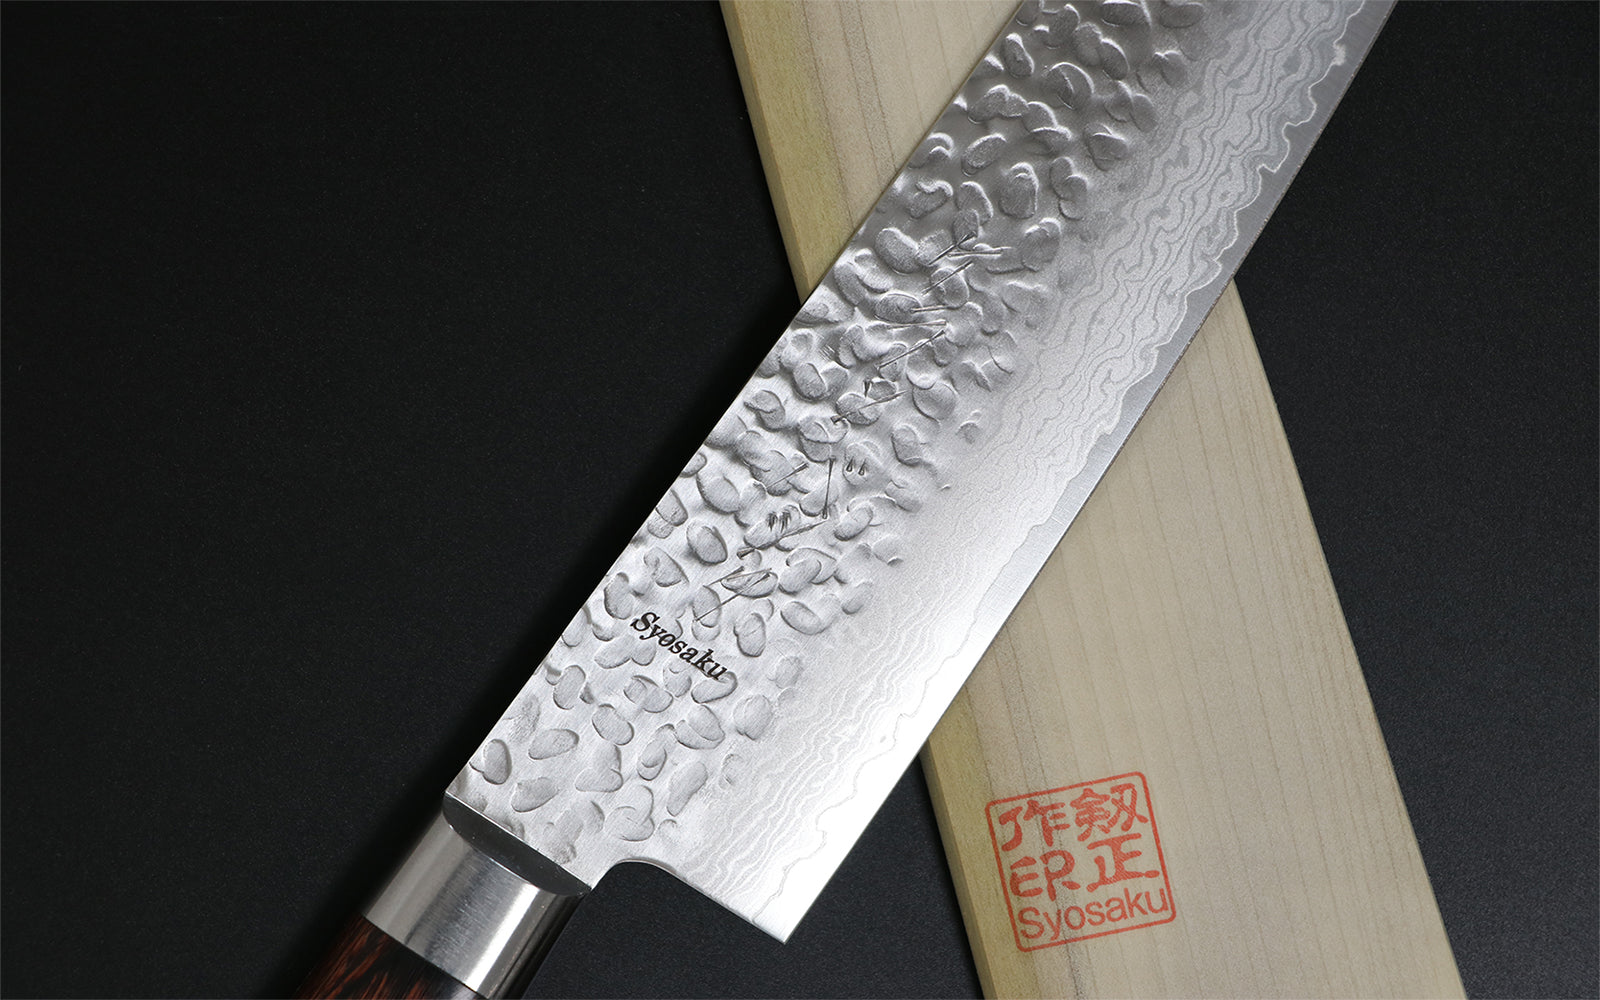 How to order a custom engraved knife?